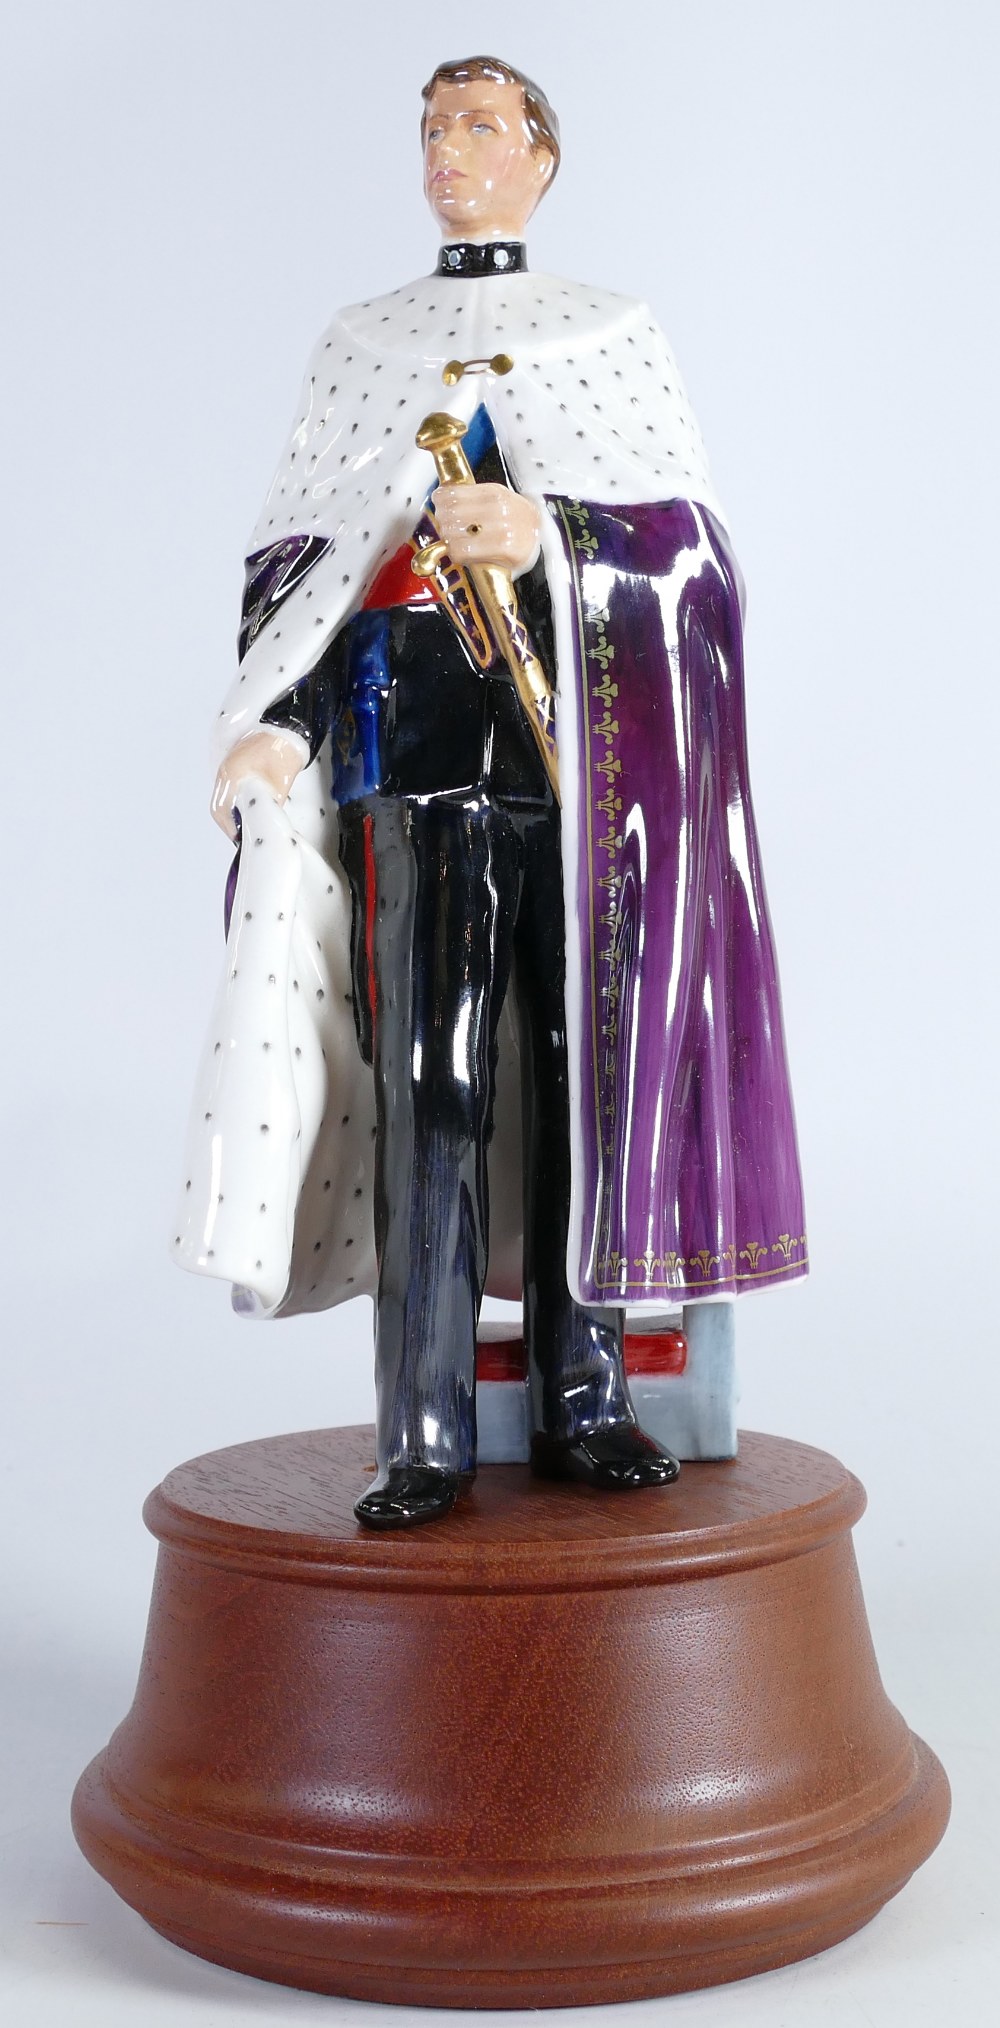 Royal Doulton prestige figure HRH The Prince of Wales HN2883: Limited edition with wooden plinth,